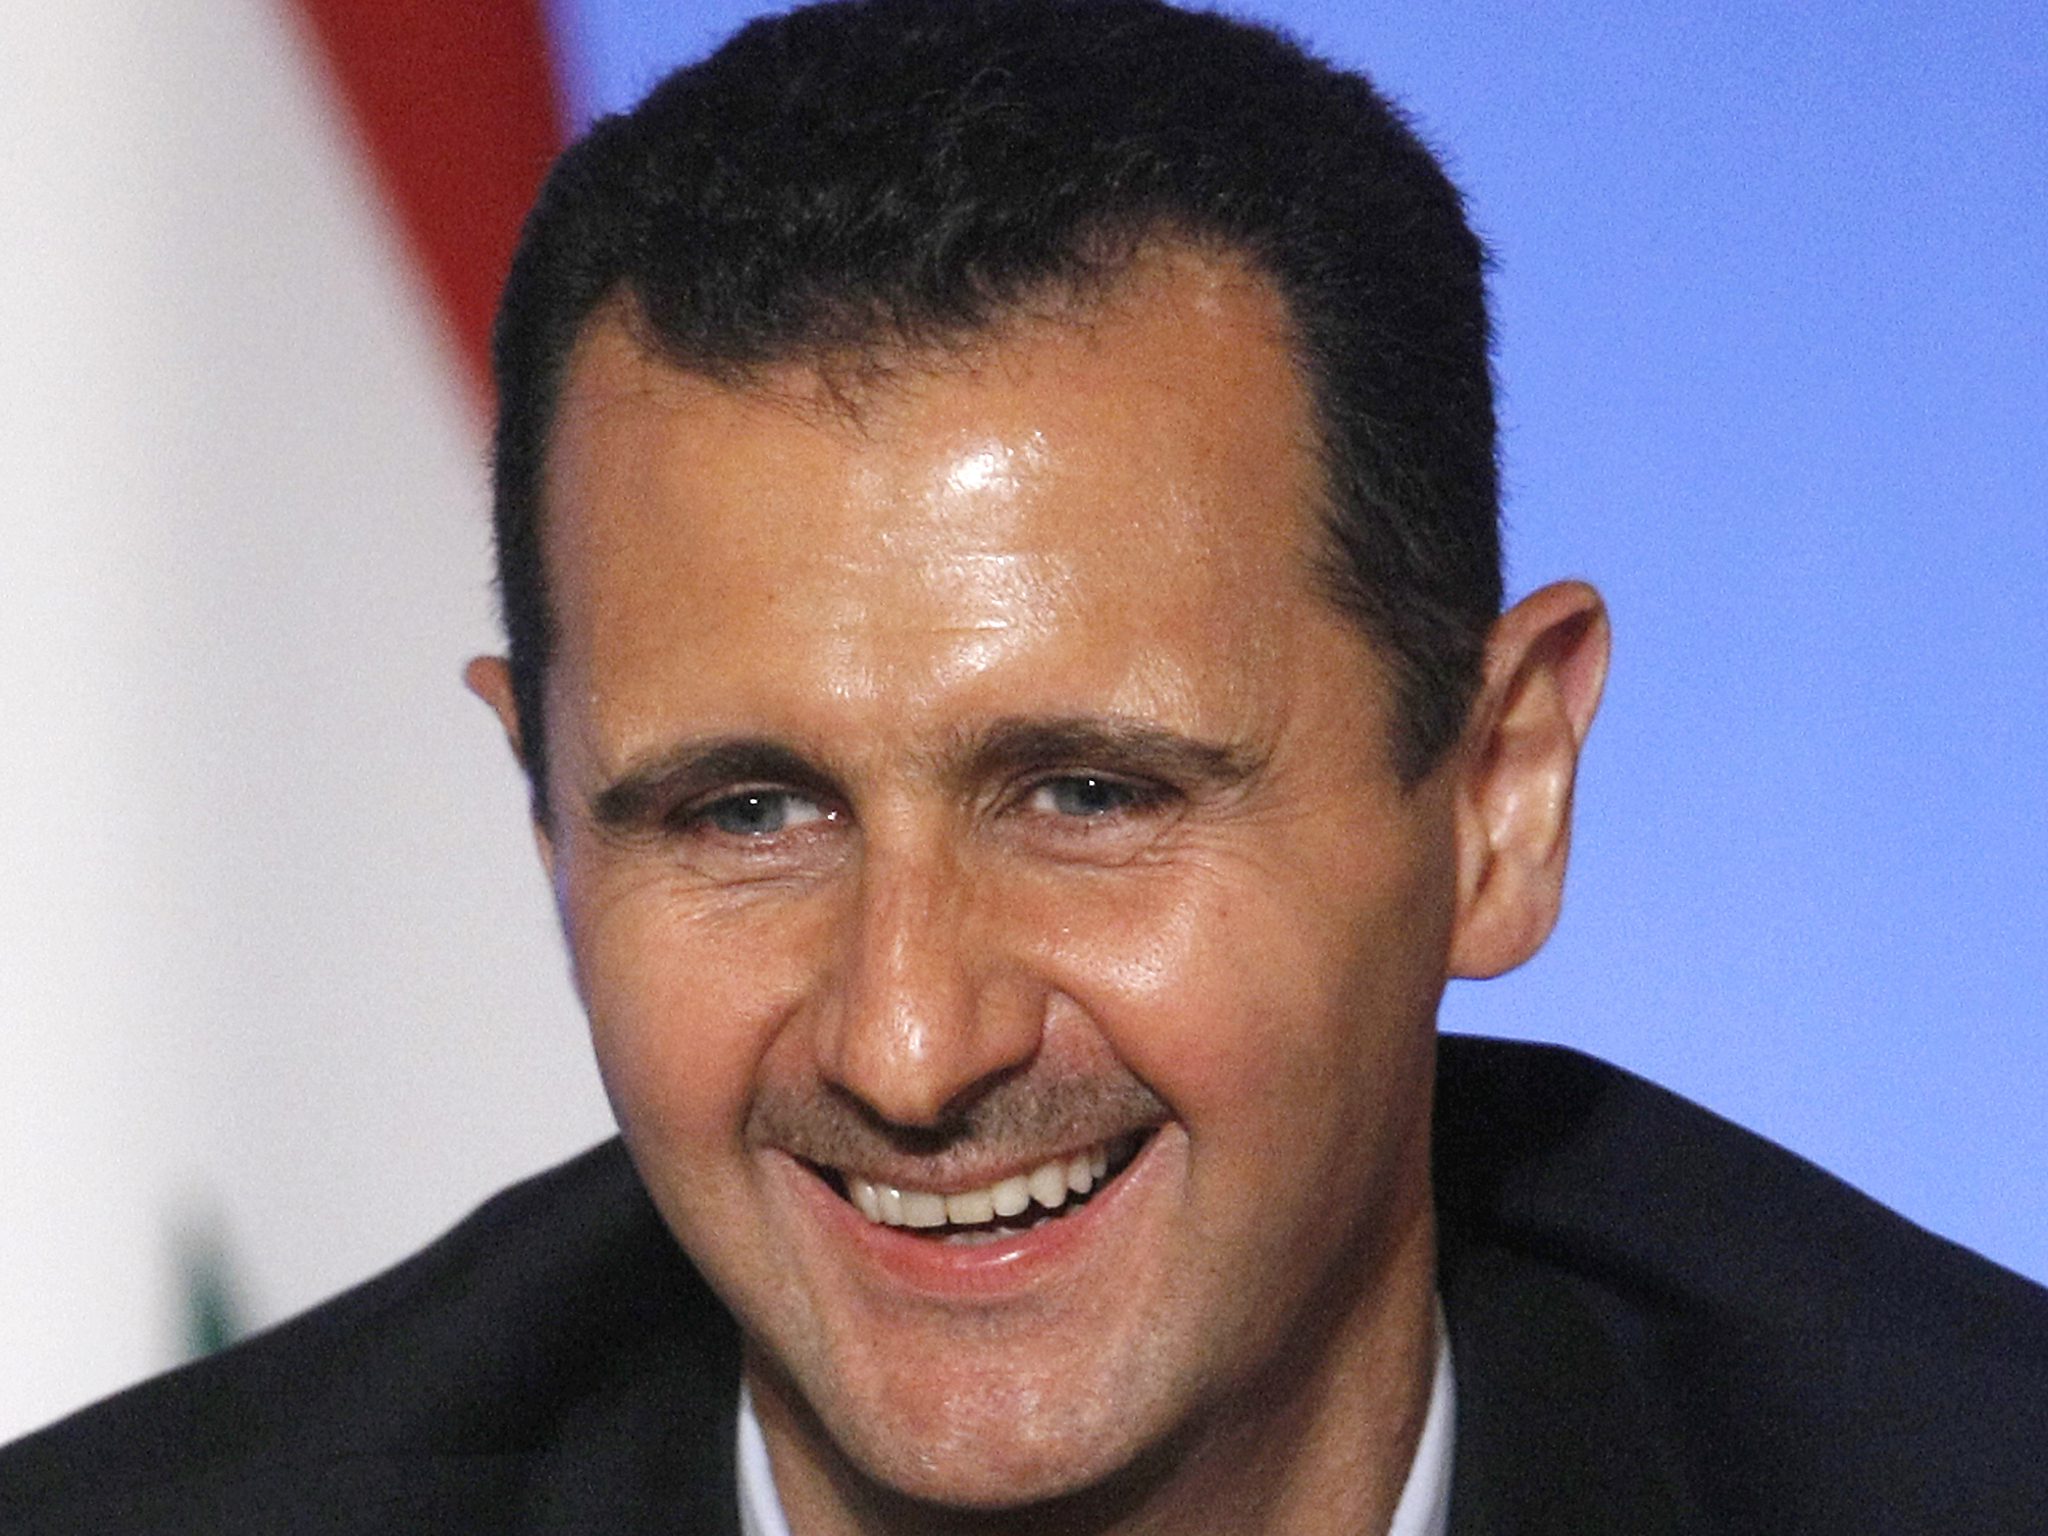 Assad Says US Aided ISIS When We Bombed Syria